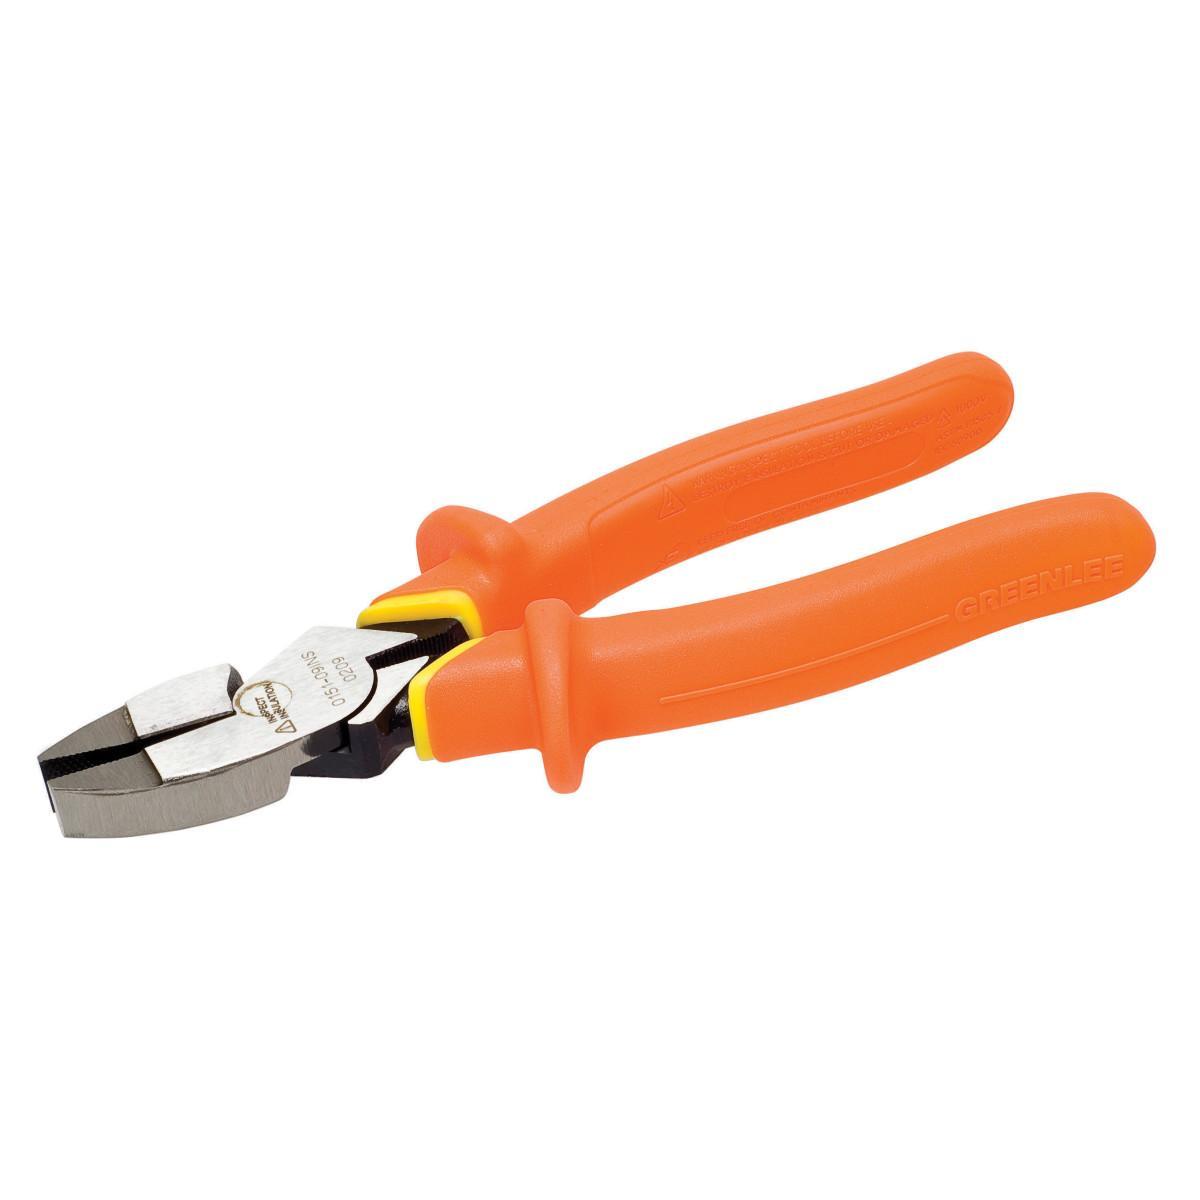 Hyde® 01040 Putty Knife, 3-1/2 in L x 1-1/2 in W, Stainless Steel Blade, Flexible Blade Flexibility